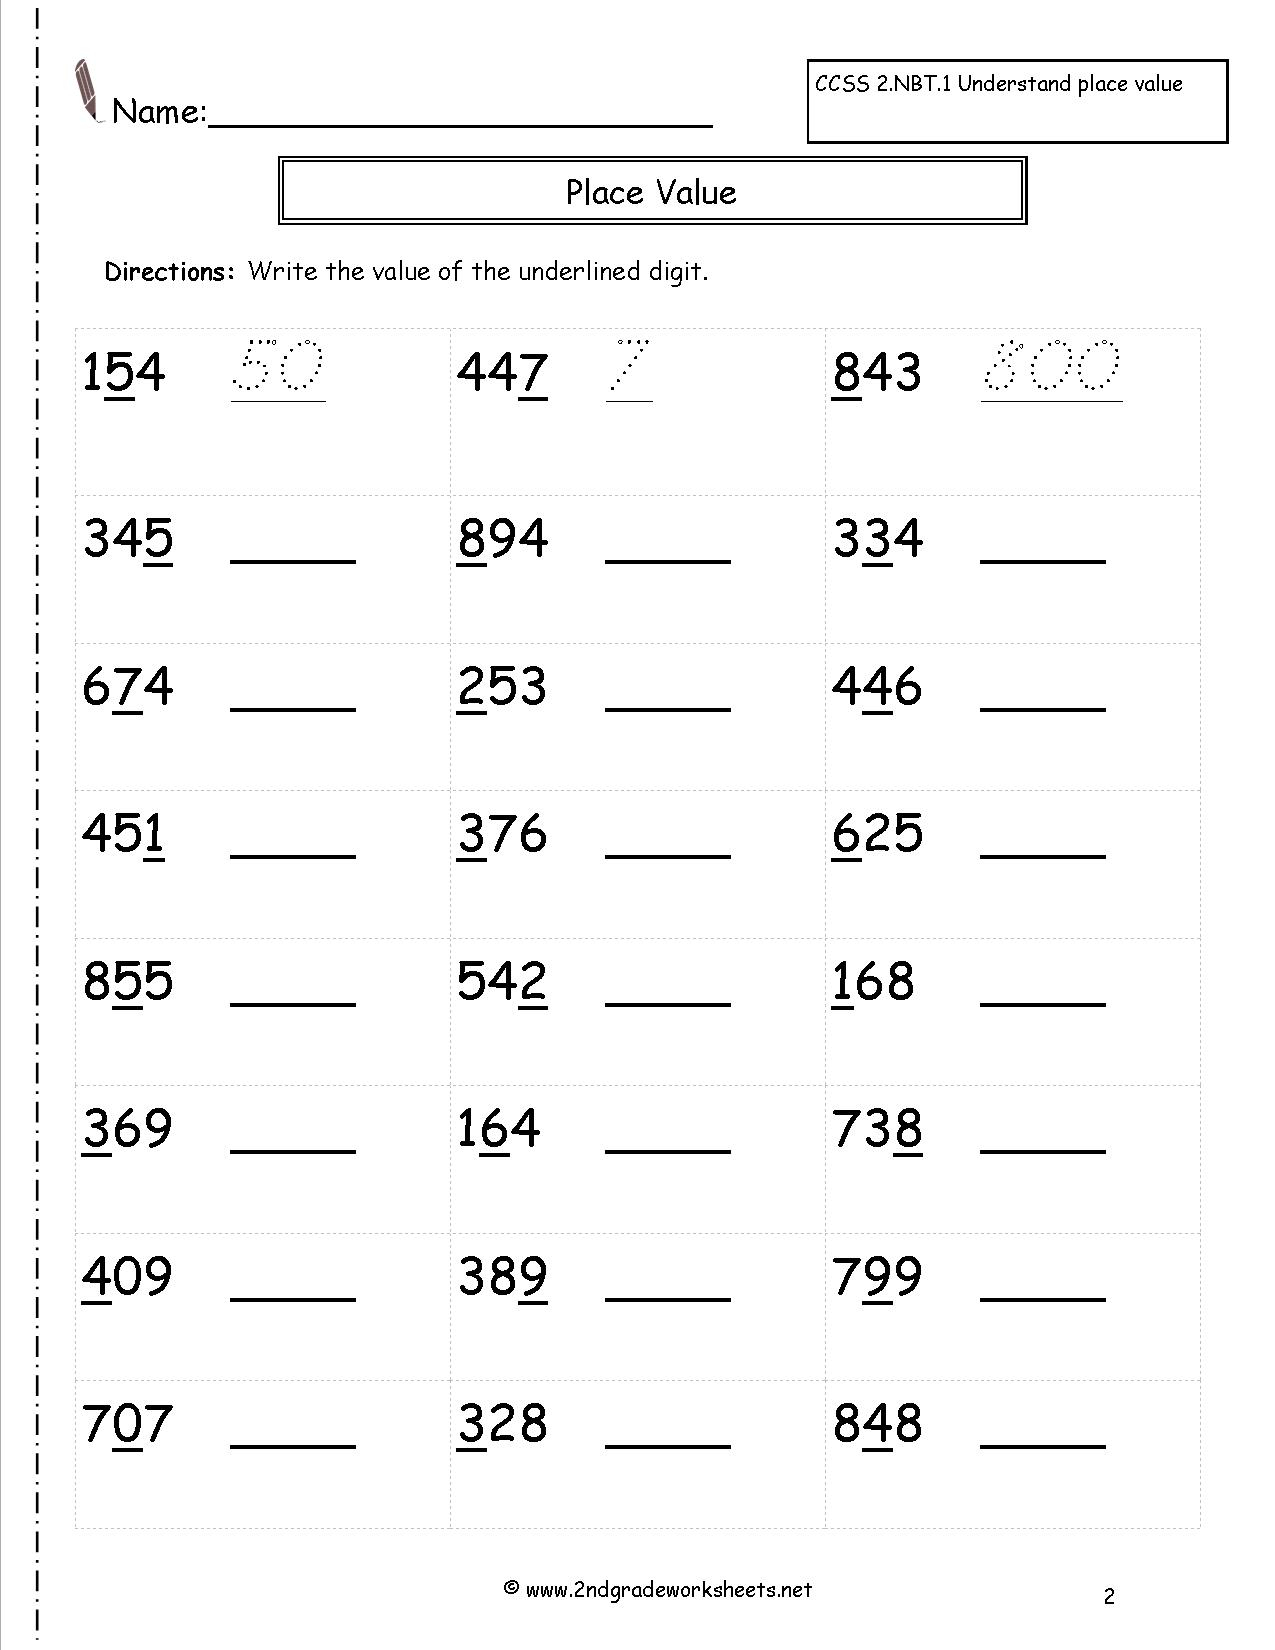 Second Grade Place Value Worksheets - Printable Place Value Puzzles